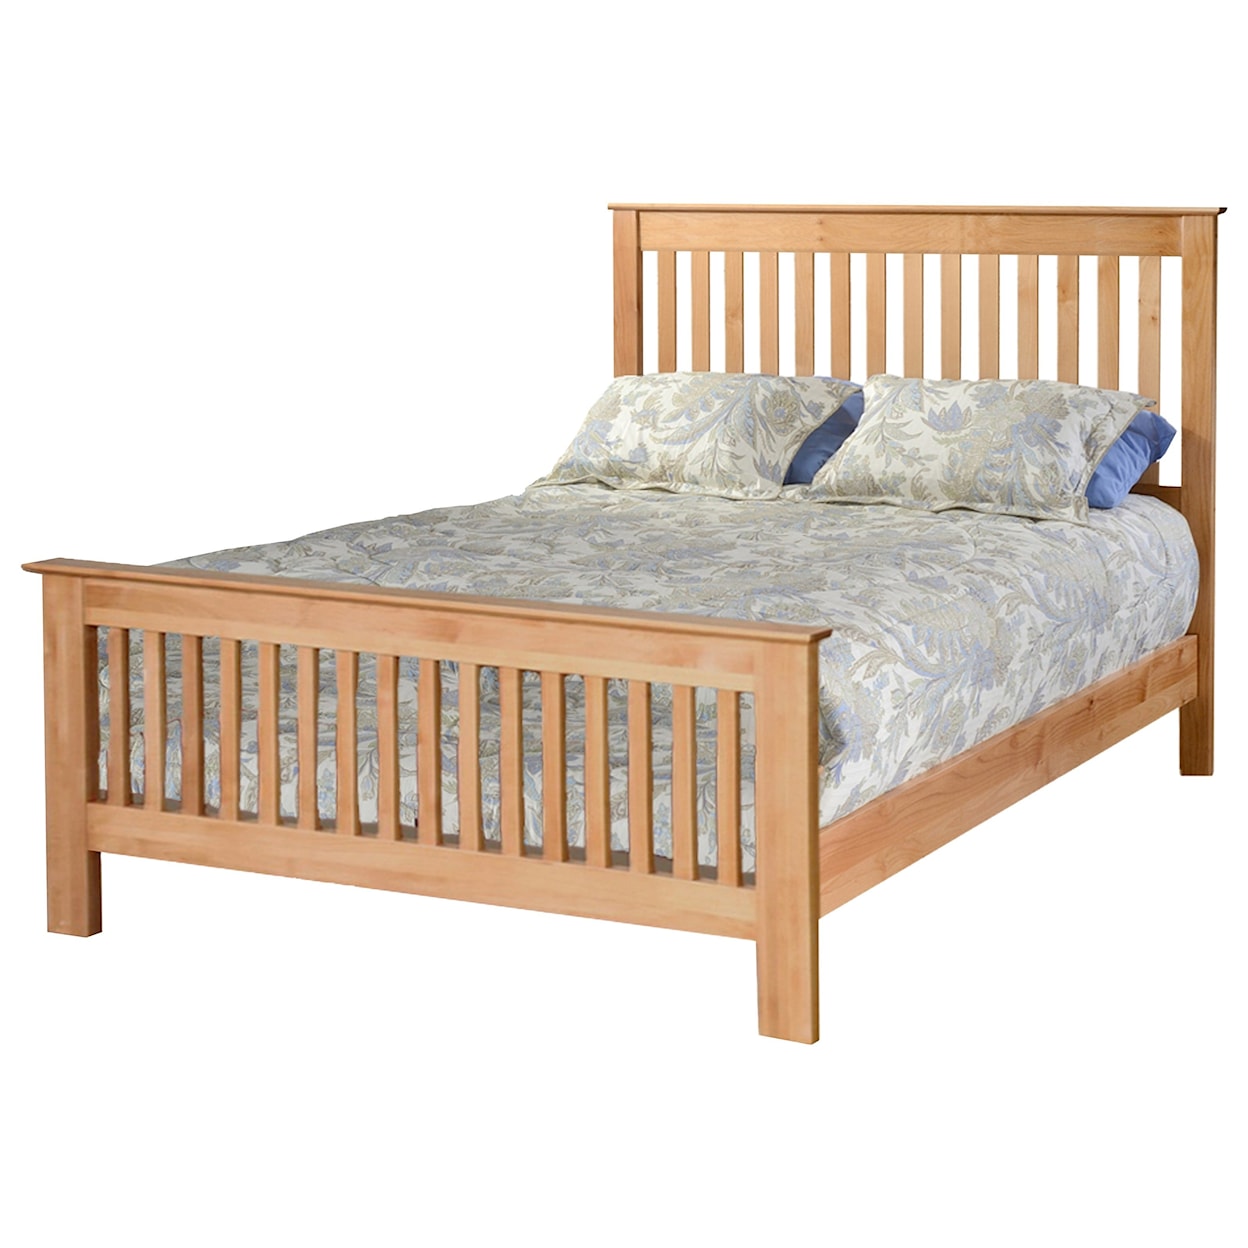 Archbold Furniture Beds Twin Slat Panel Bed